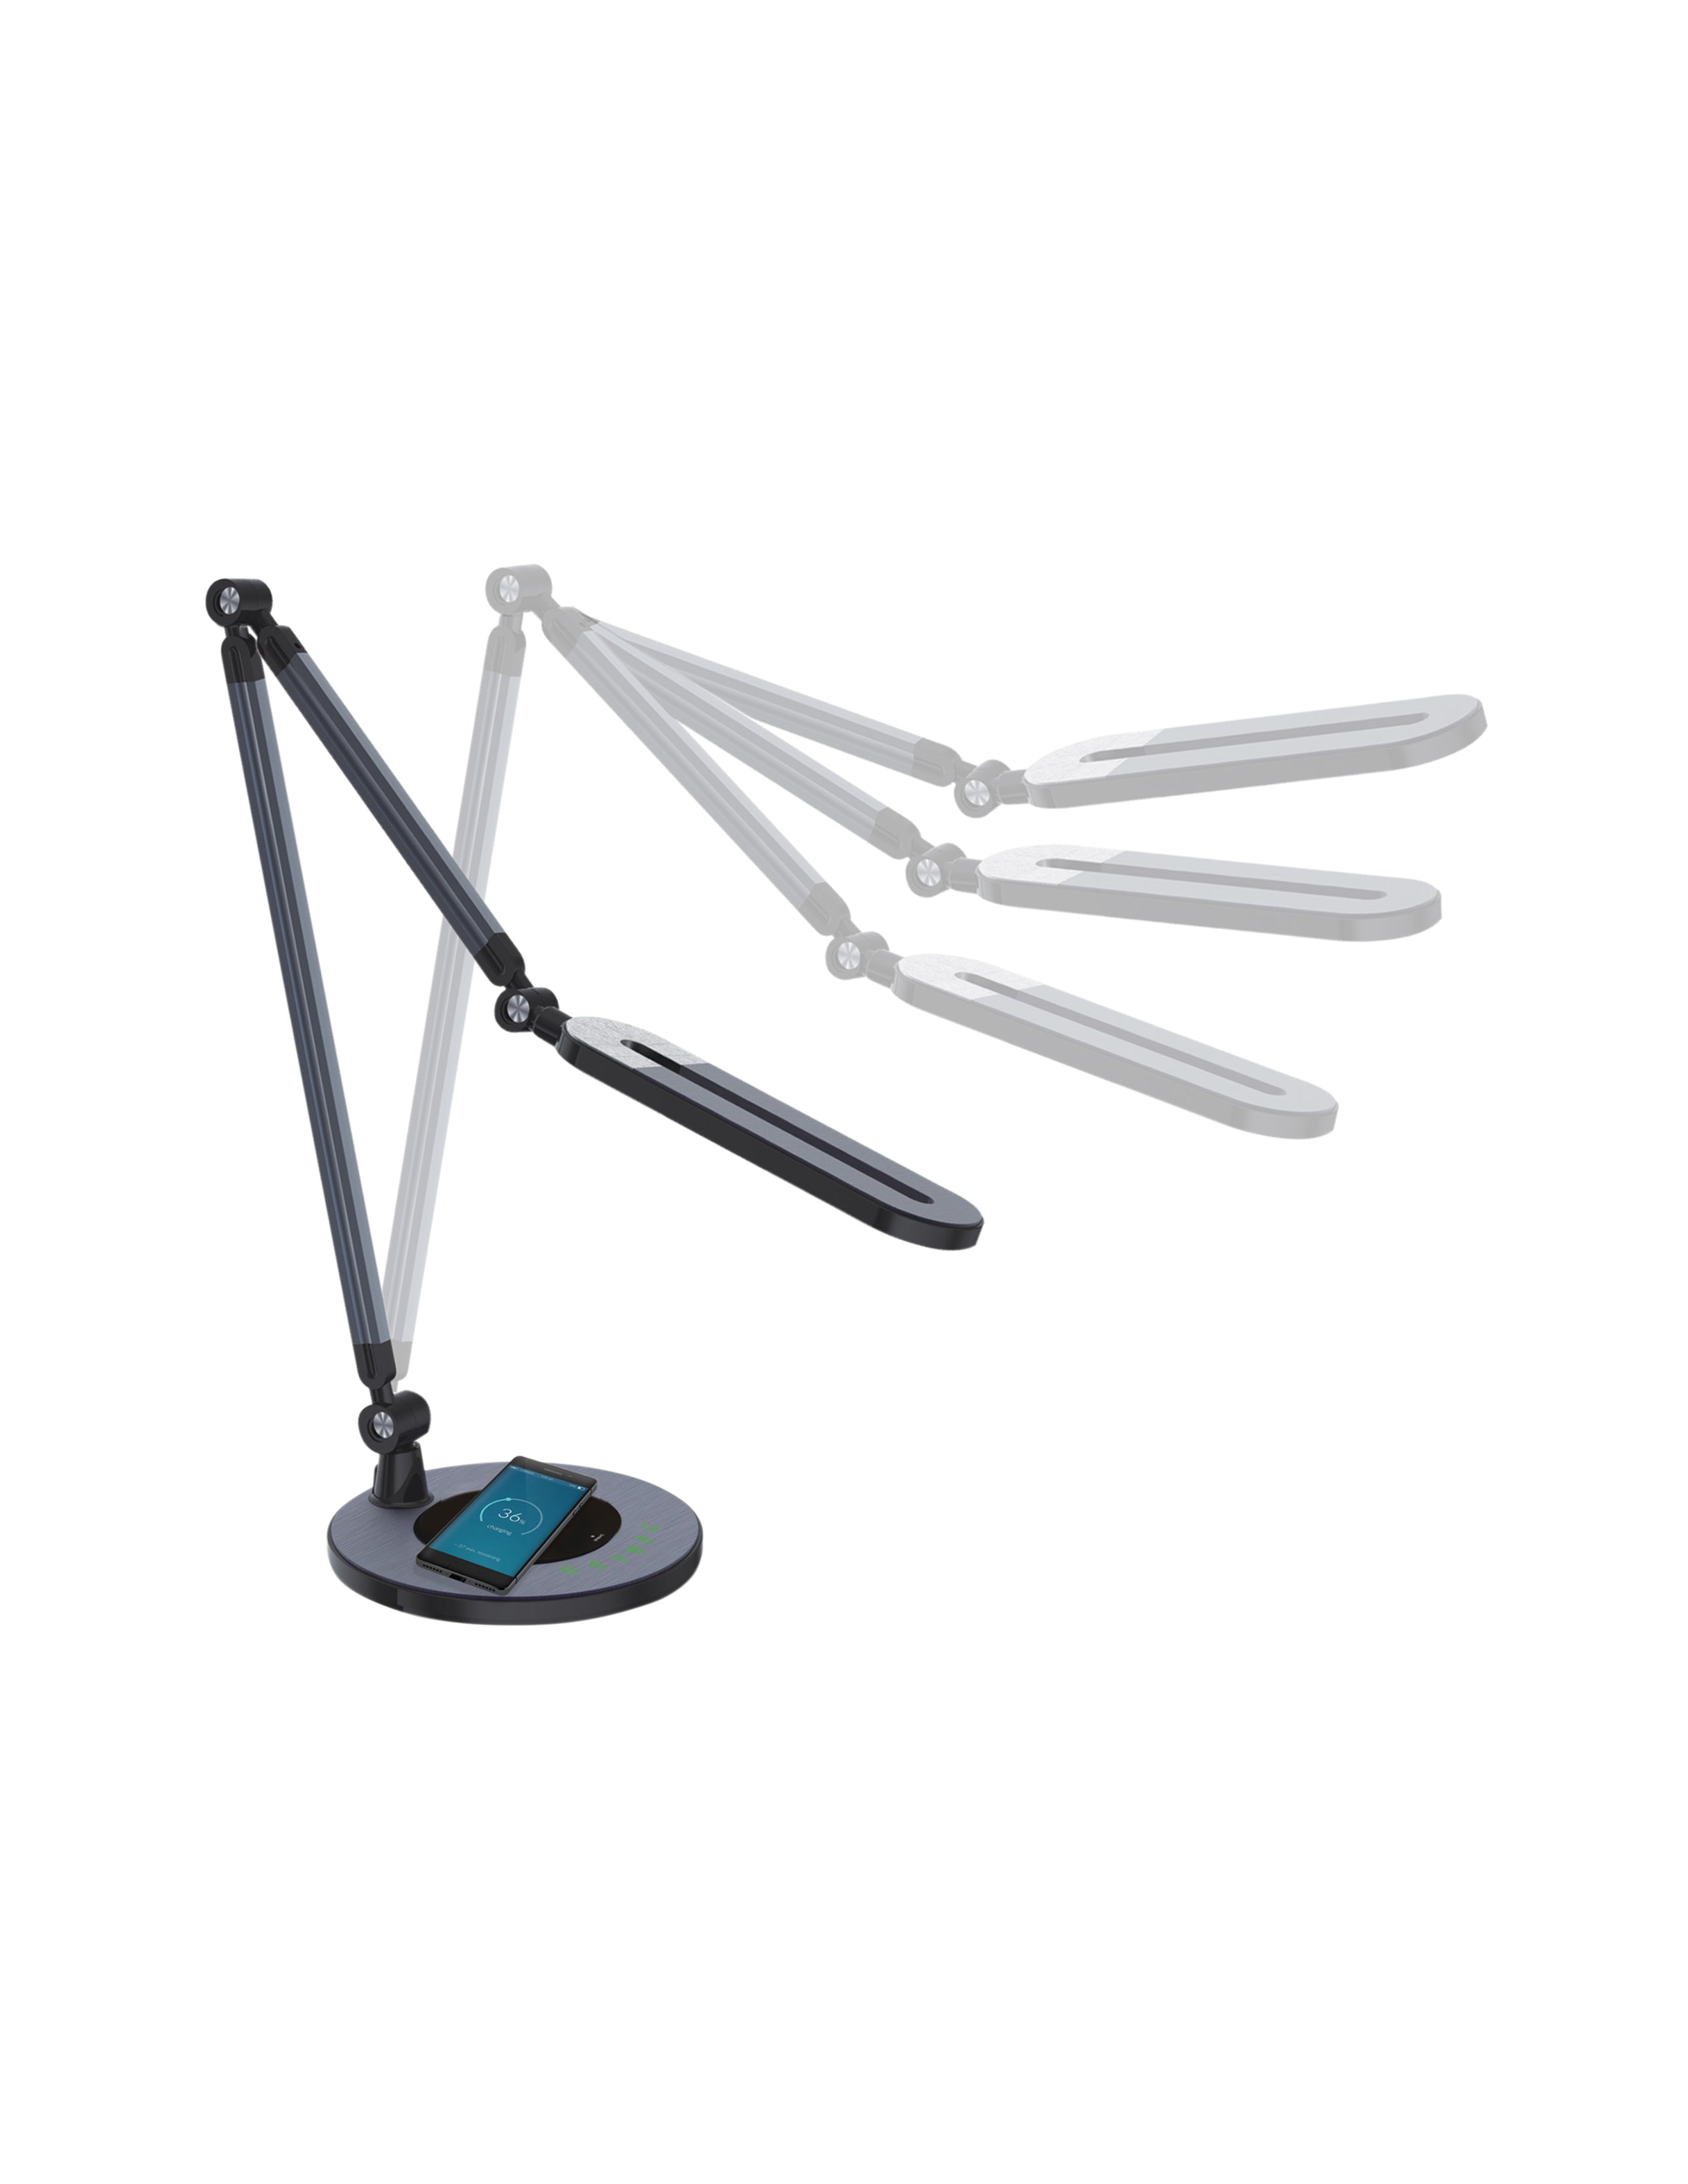 RDL-150QI/ Swing Arm LED Desk Lamp with Wireless Charging